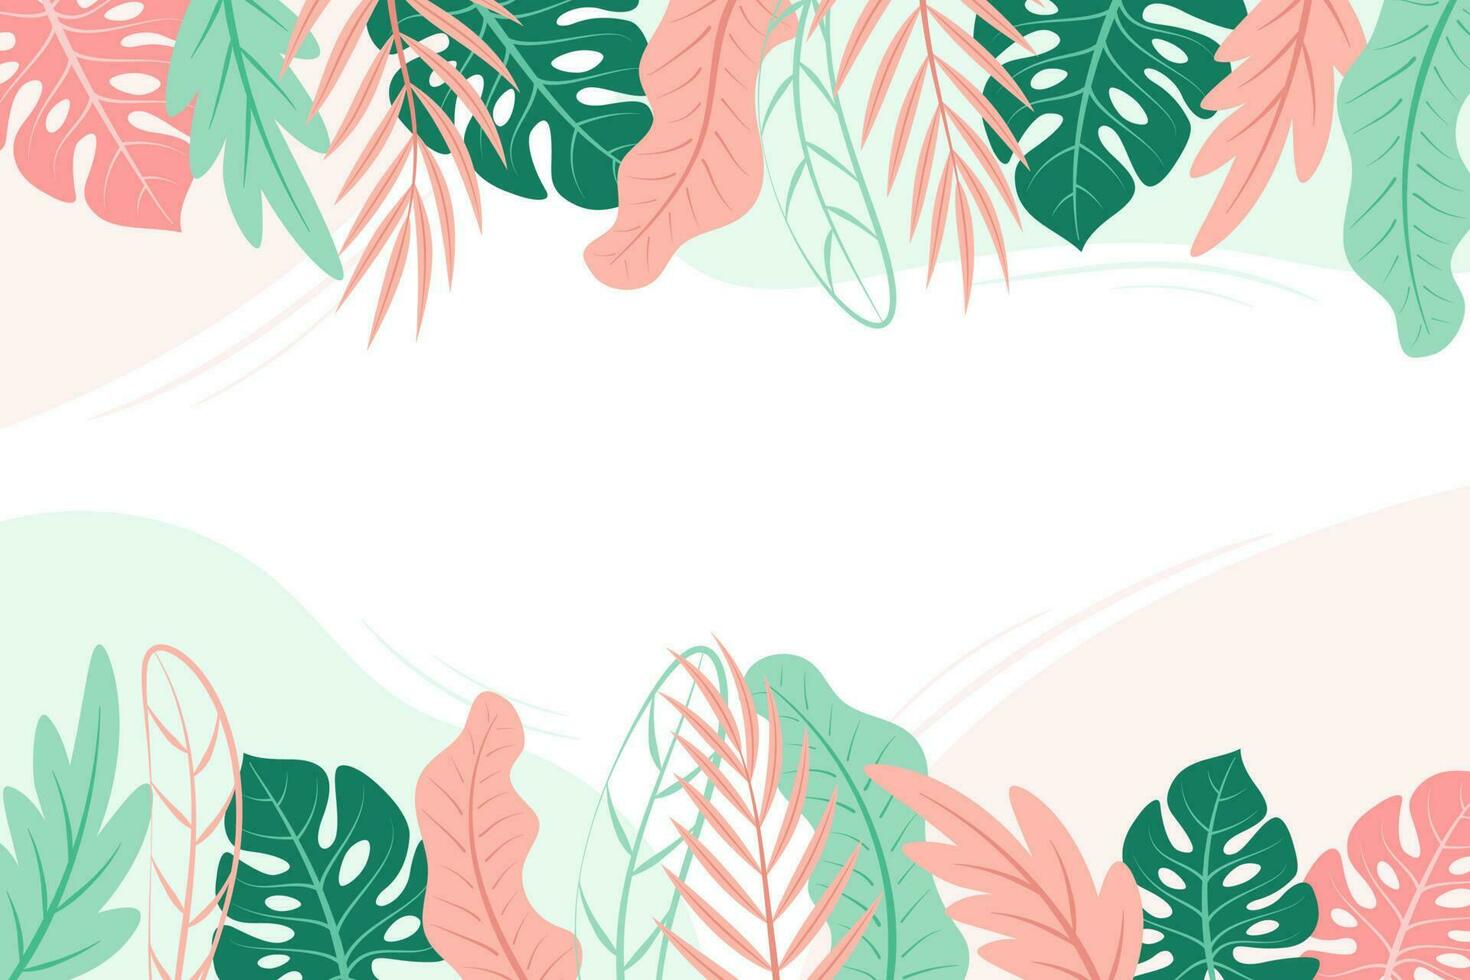 Summer background vector design with tropical leaves